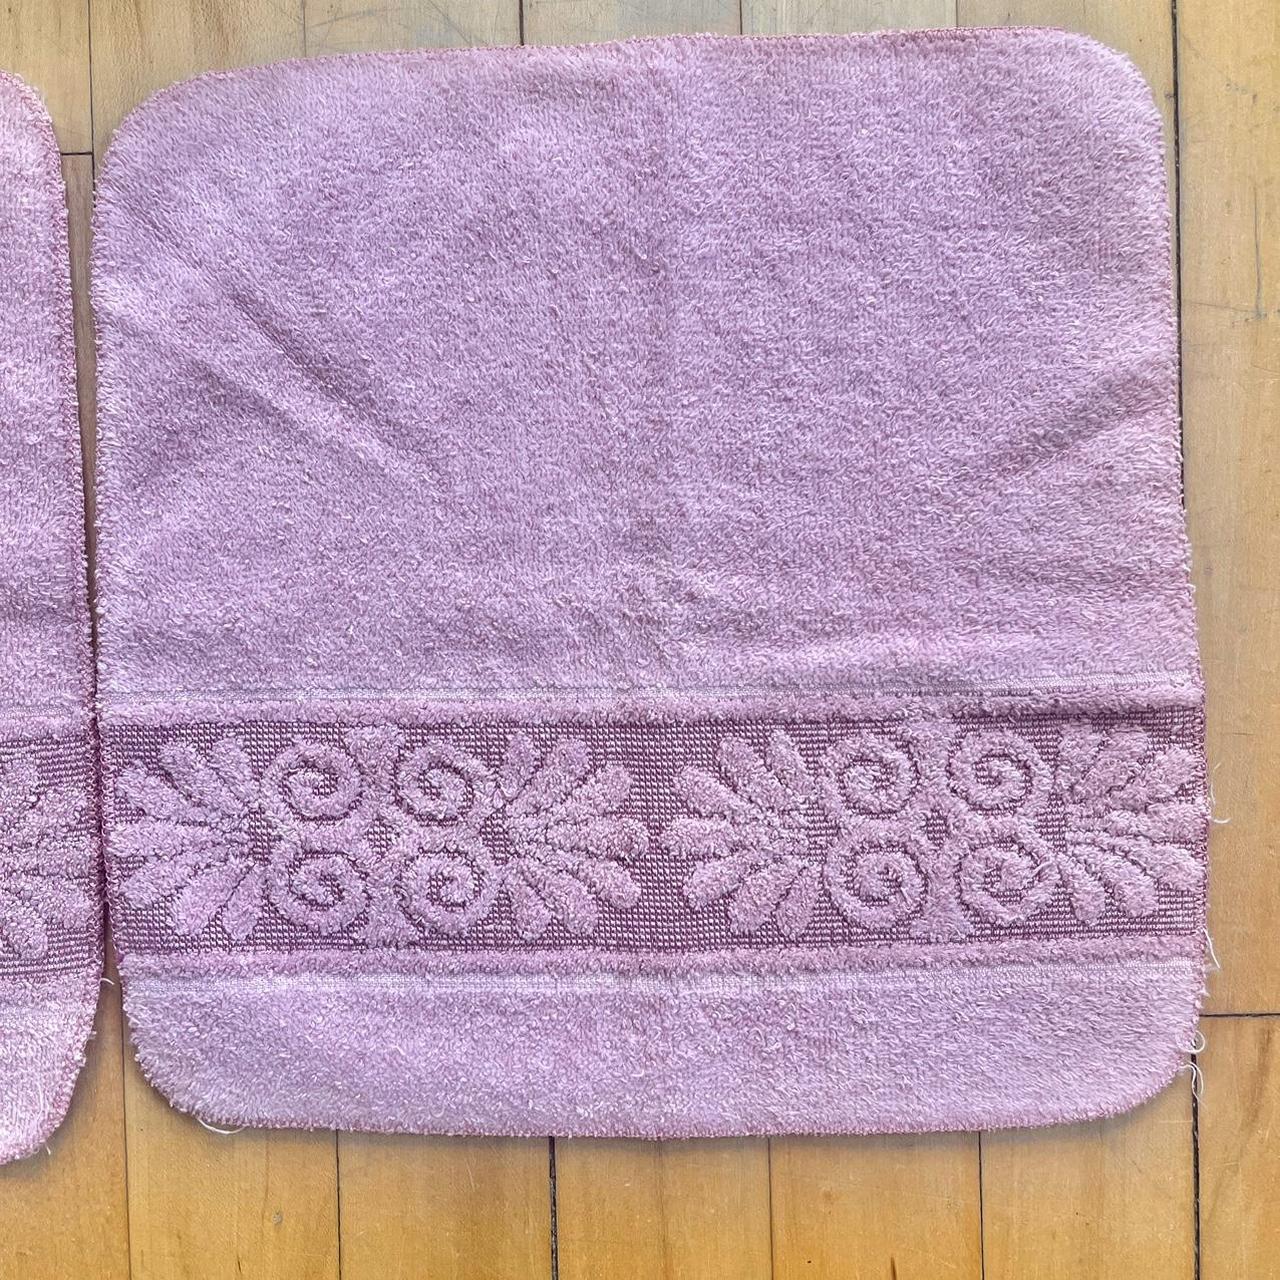 Vintage Cannon Bath Towel - 42x25 Purple - Made in USA